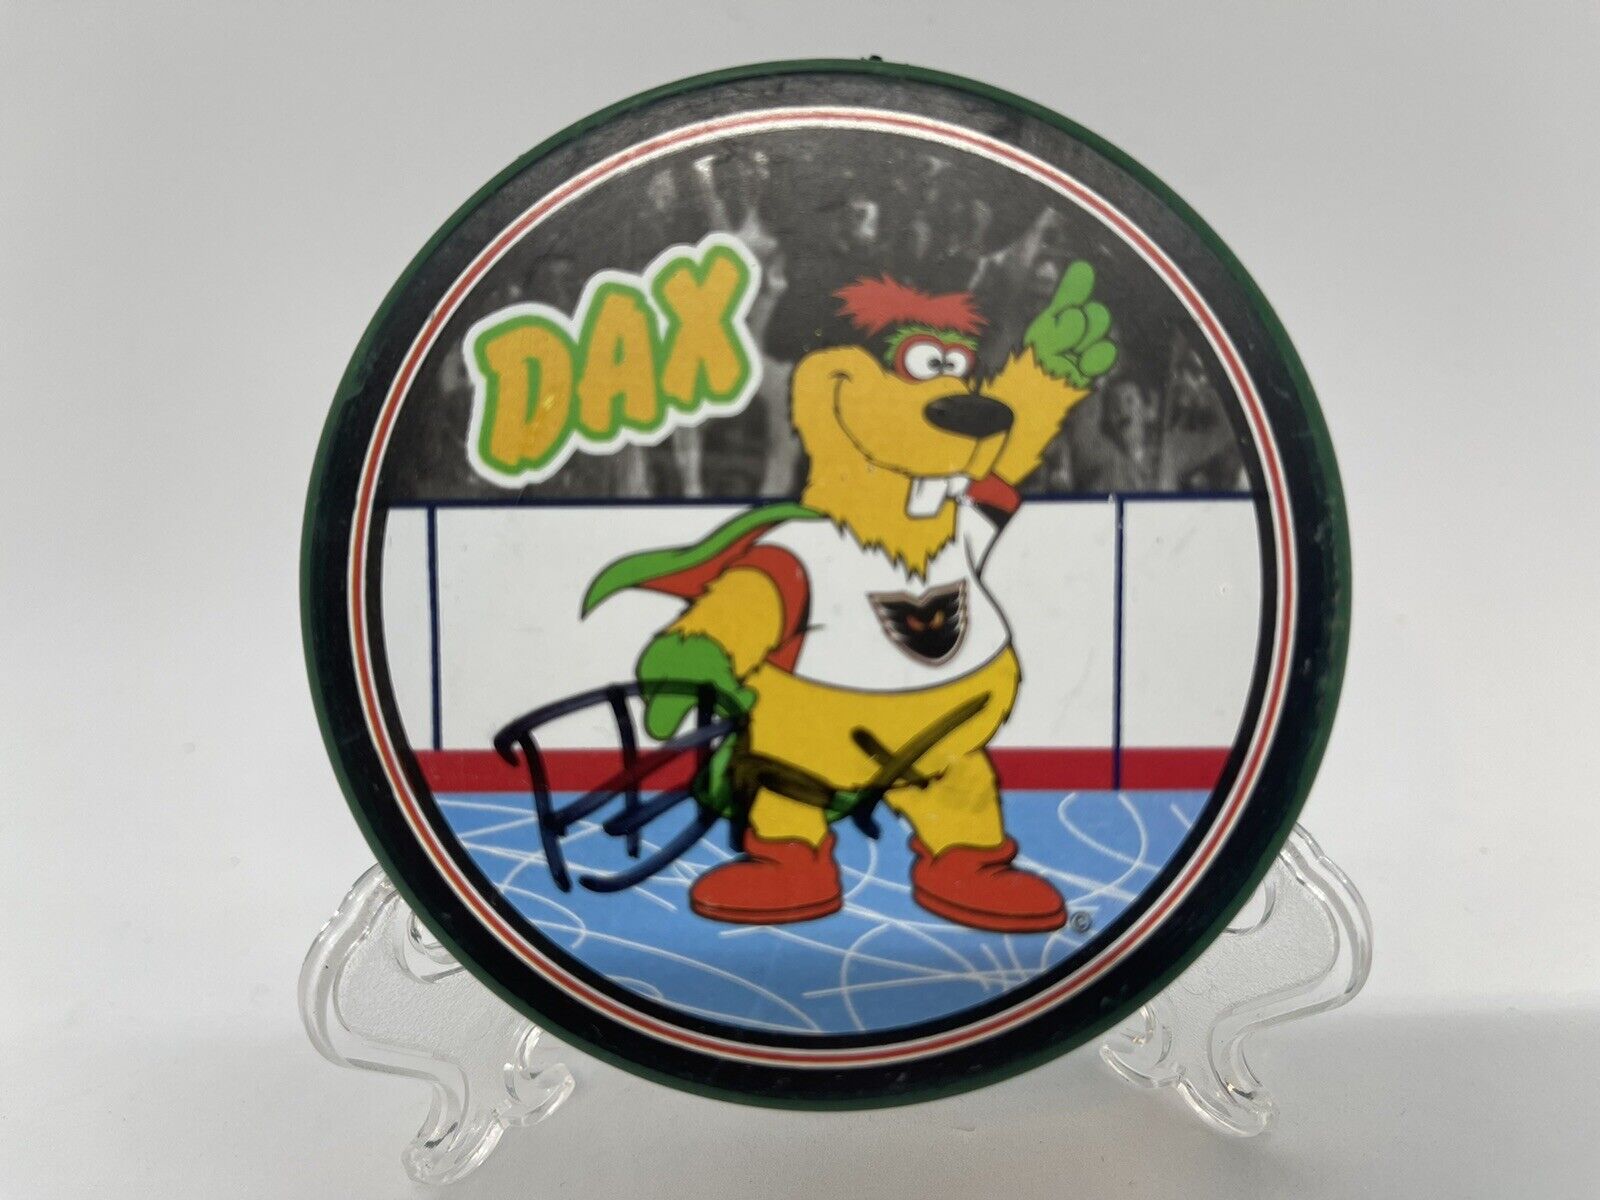 AHL Exclusive Arena Collection Adirondack Phantoms Autographed DAX the Mascot